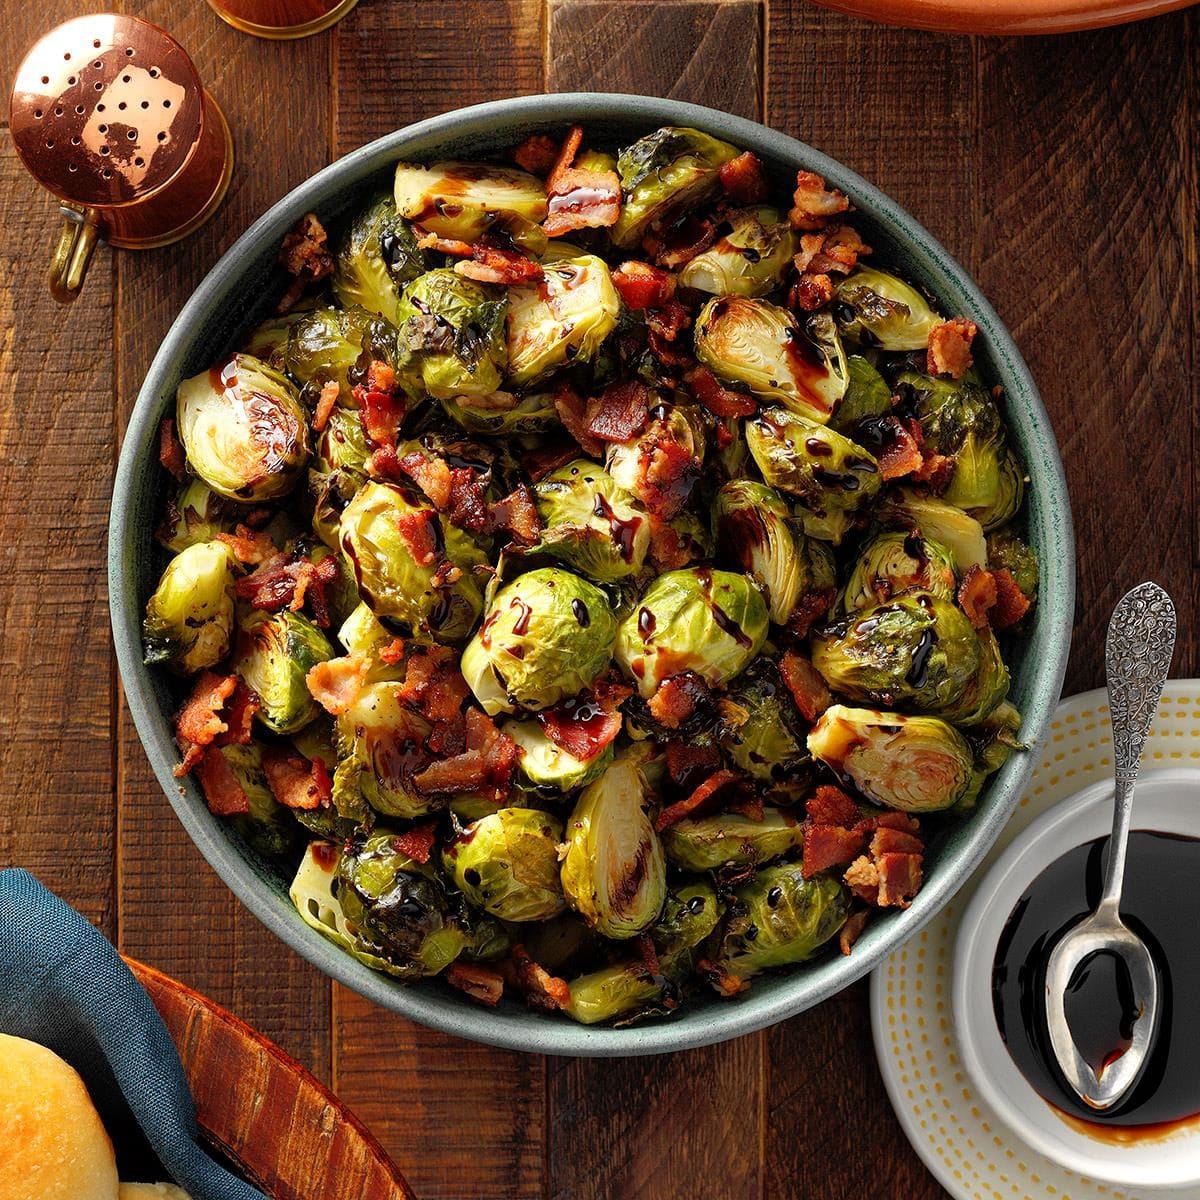 Roast brussel sprouts with bacon